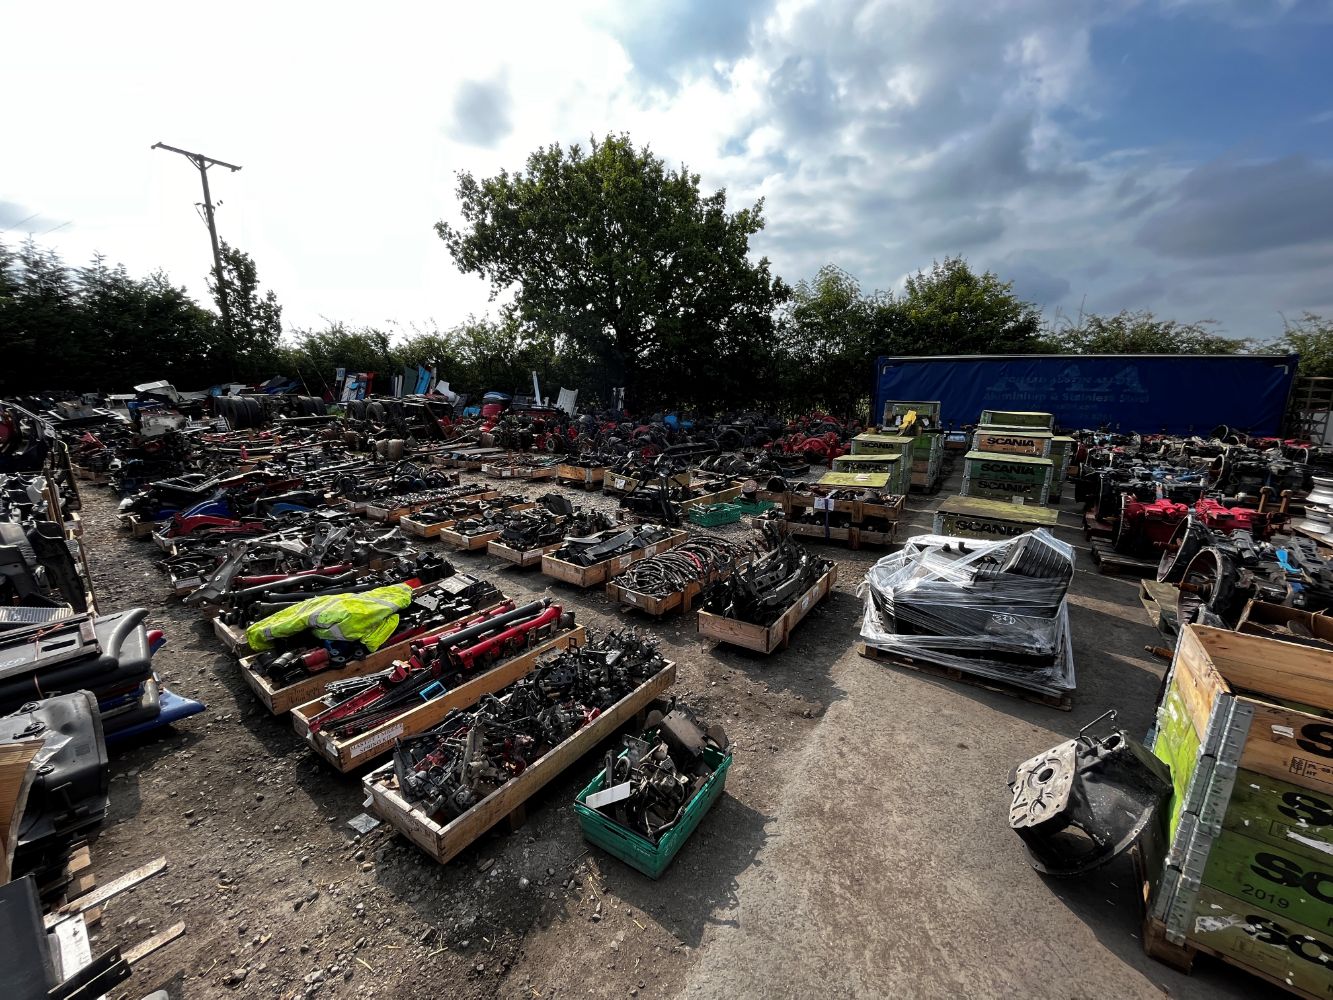 Woolliscroft Garage Services Dispersal Sale - Large Qty. of New & Used Truck Parts & Spares